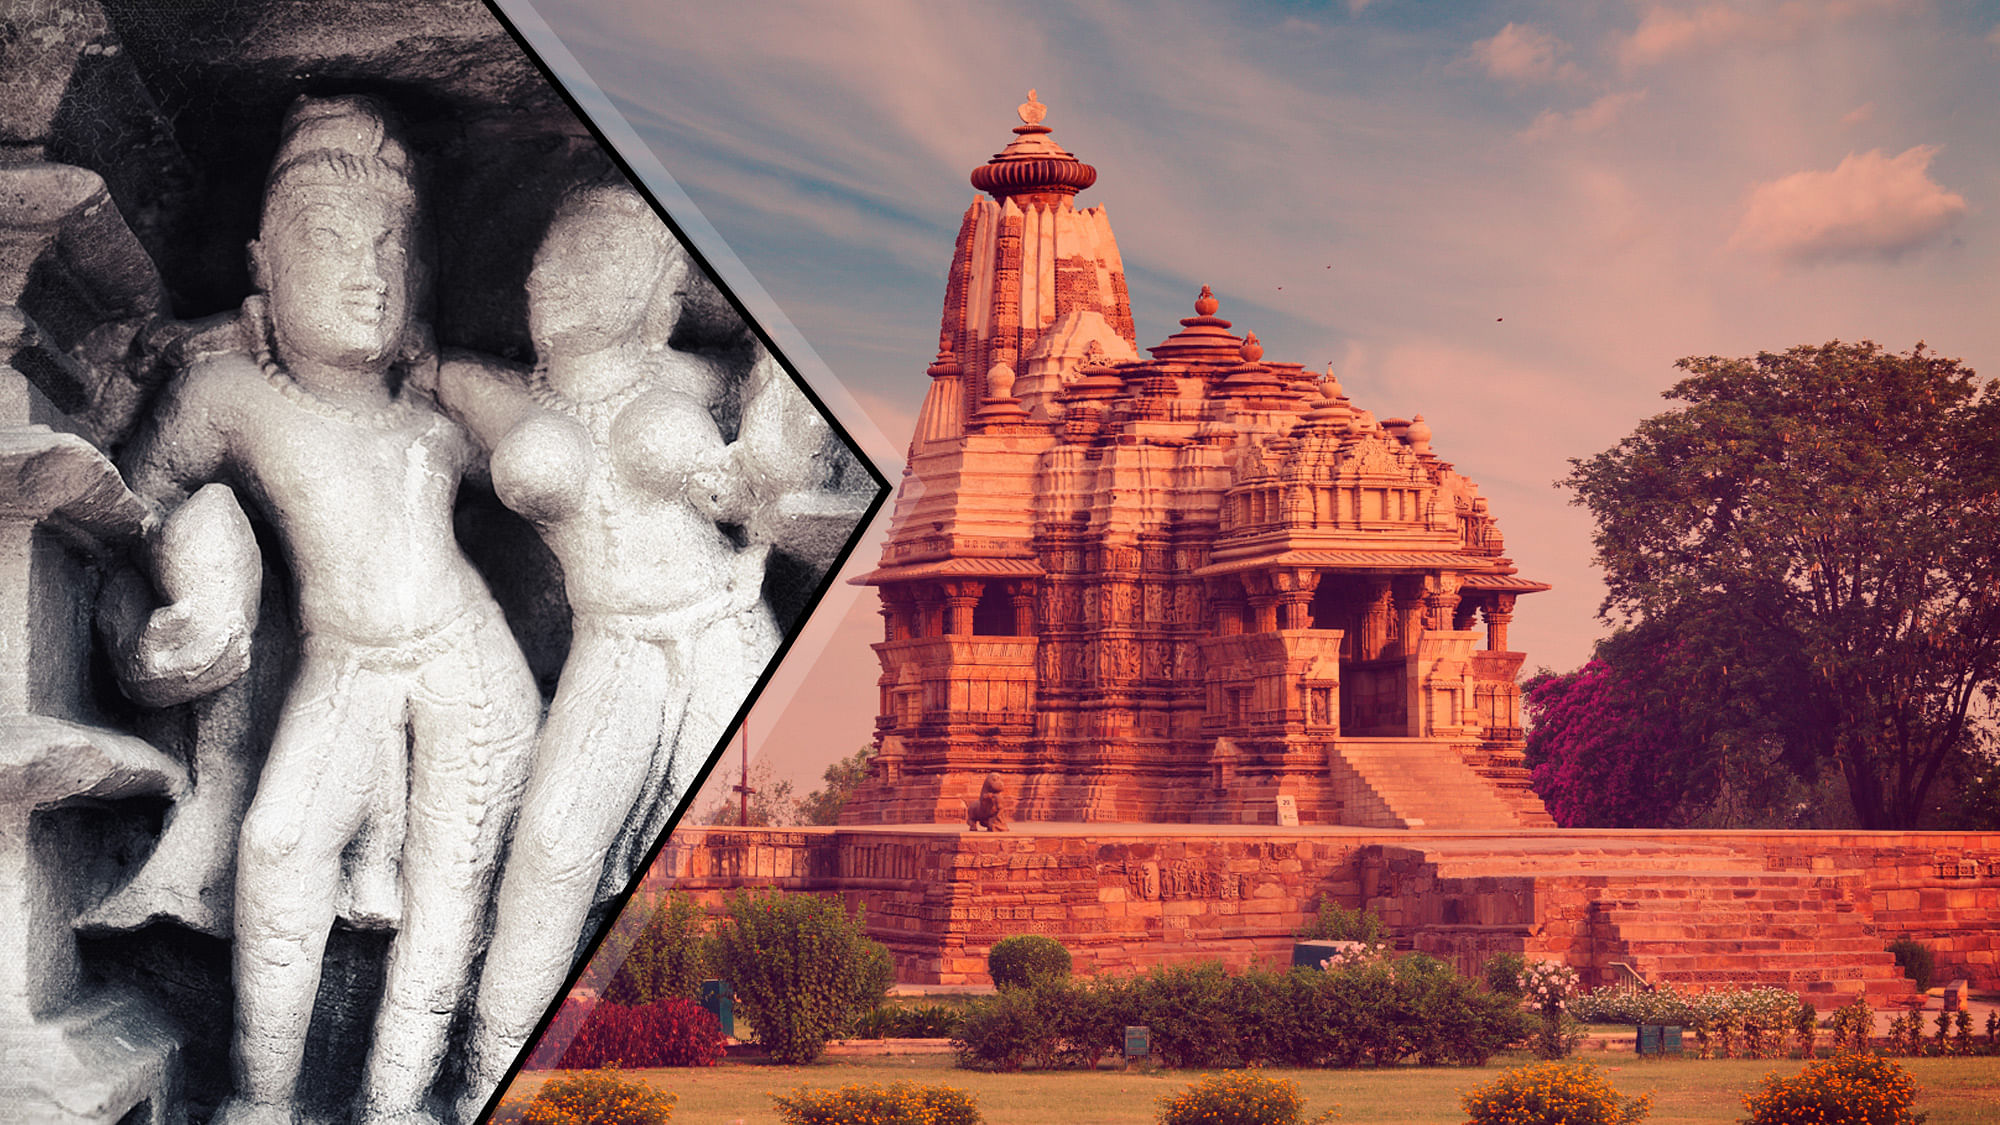 According to an audio guide, only a tenth of Khajuraho’s sculptures are explicit in nature. (Photo: iStock/Altered by <b>The Quint</b>)